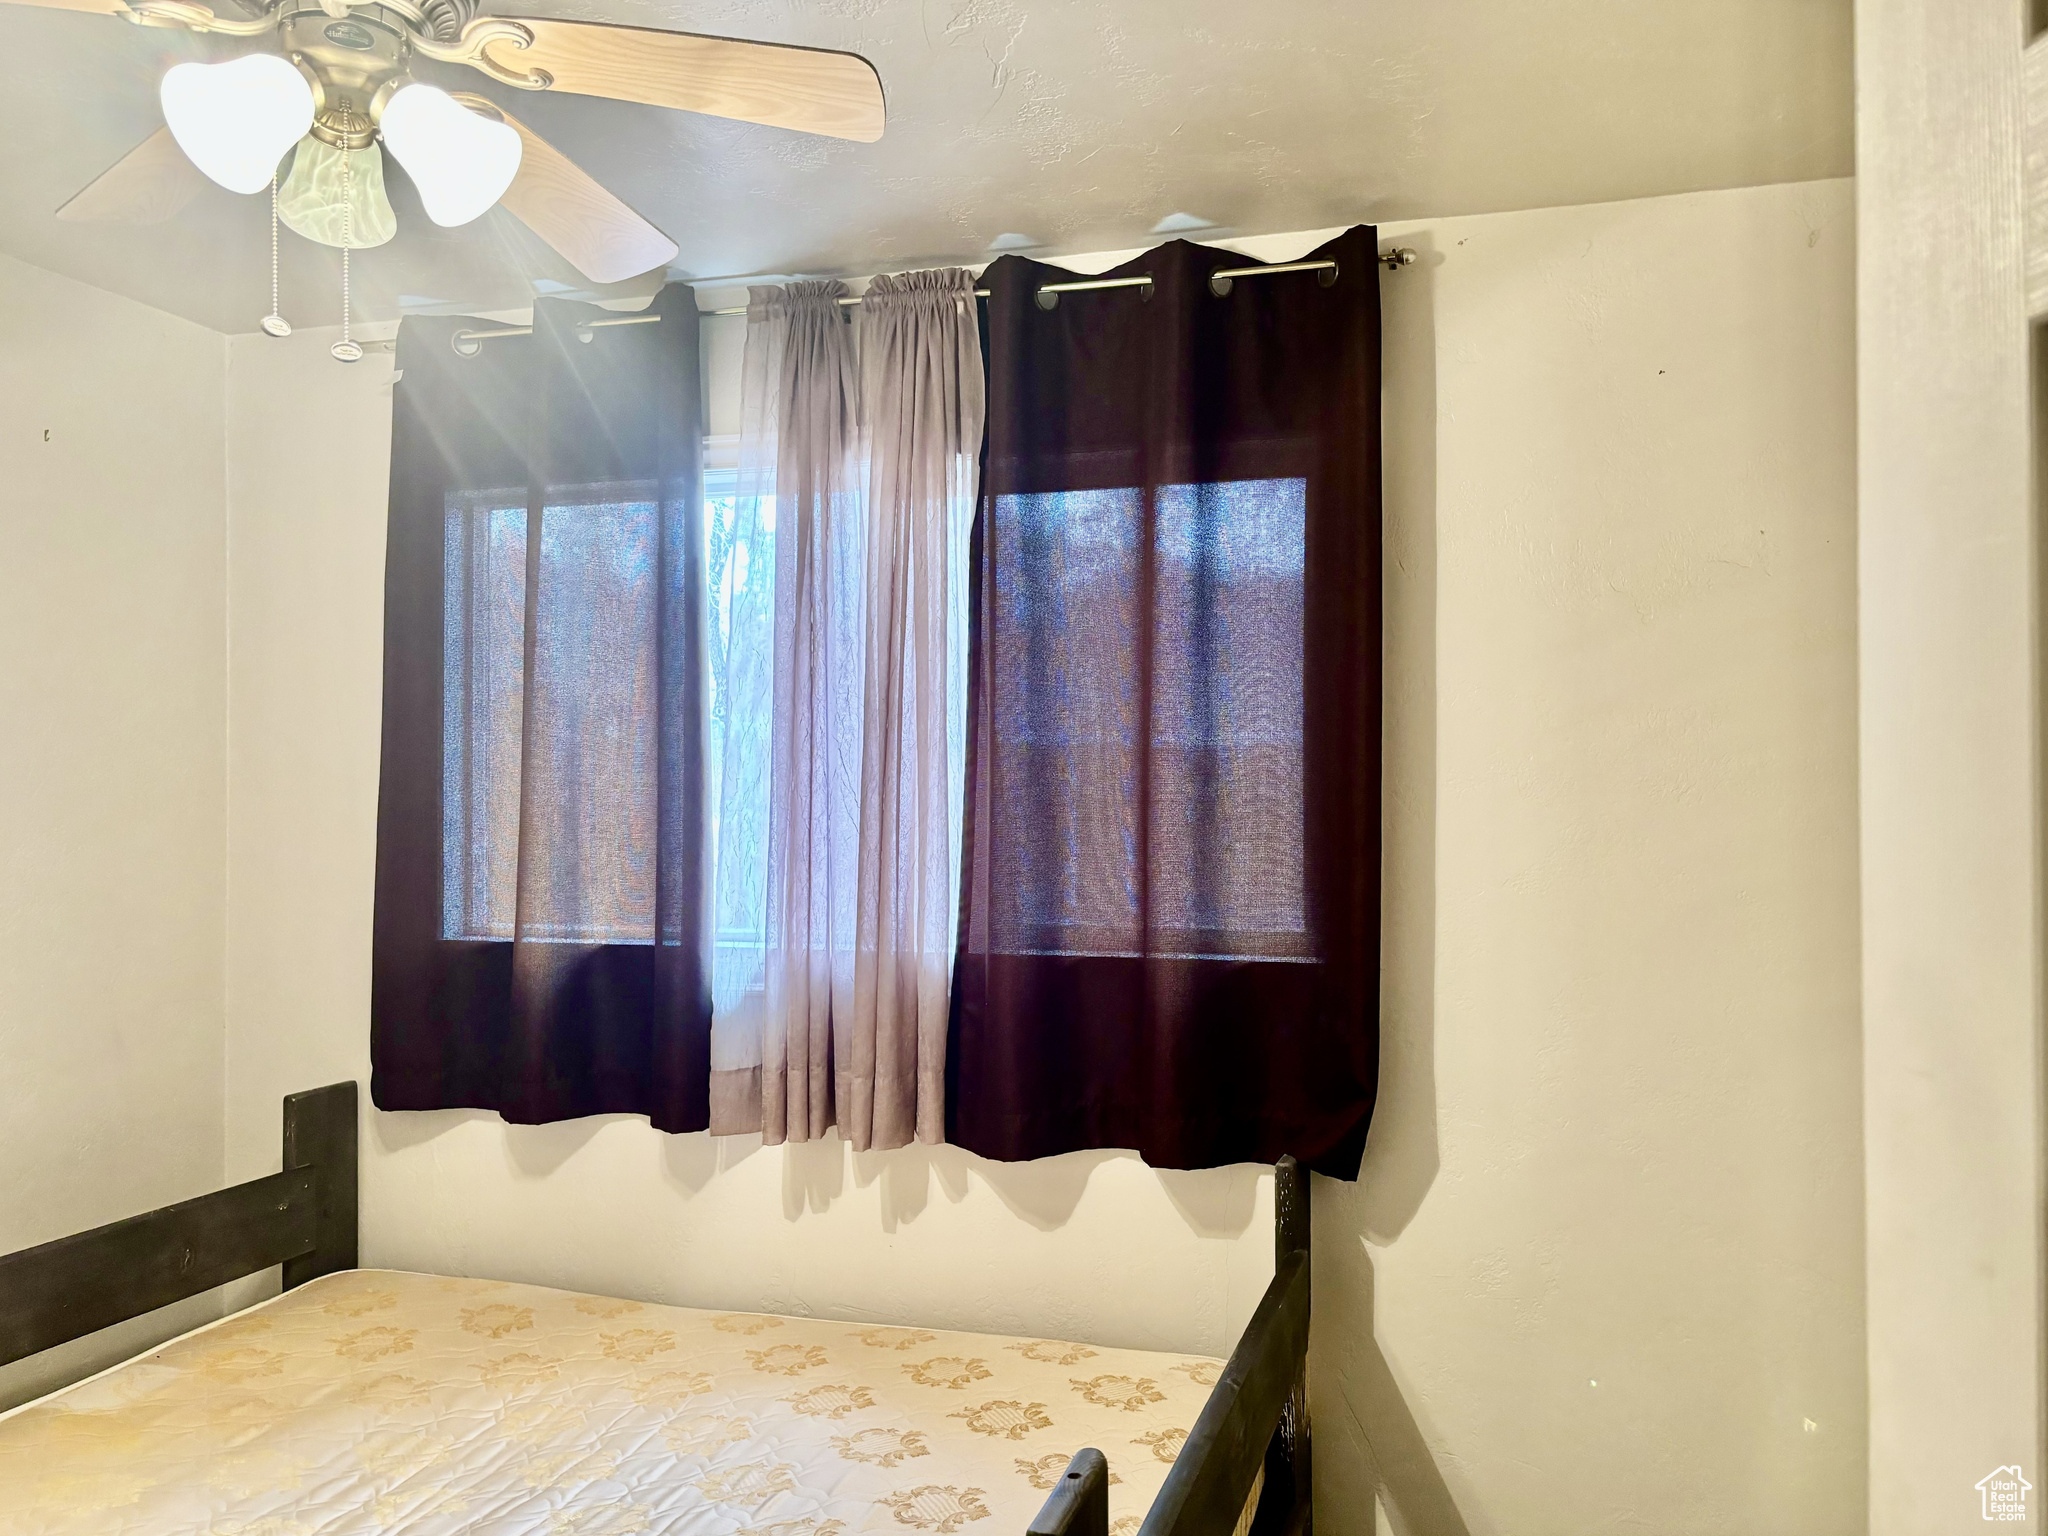 Bedroom 2, with ceiling fan